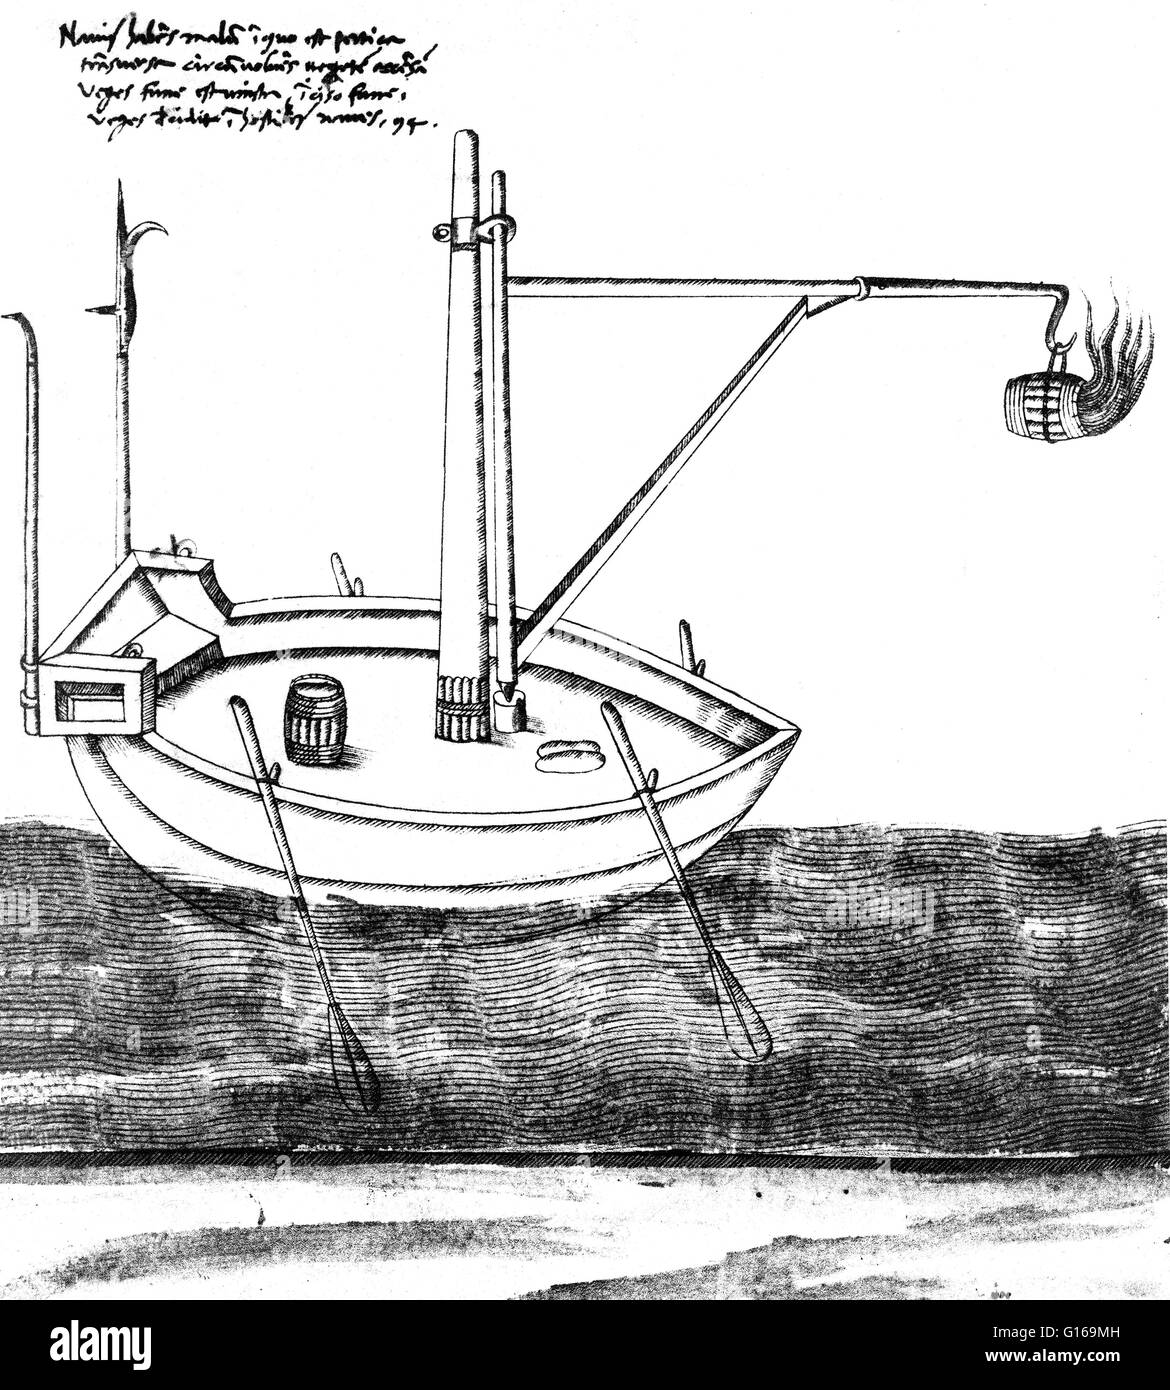 Boat with Flame Thrower designed by Taccola, 15th Century. Design for boat equipped with flame thrower by Taccola. Mariano di Jacopo detto il Taccola (1382 - 1453) was an Italian administrator, artist and engineer of the early Renaissance. He is known for his technological his two treatises, De ingeneis (Concerning engines, 1433) and De machinis (Concerning machines, 1449), in which he restated many of the devices from the long development process of his first treatise. which feature annotated drawings of a wide array of innovative machines and devices. He is known to have joined the Stock Photo